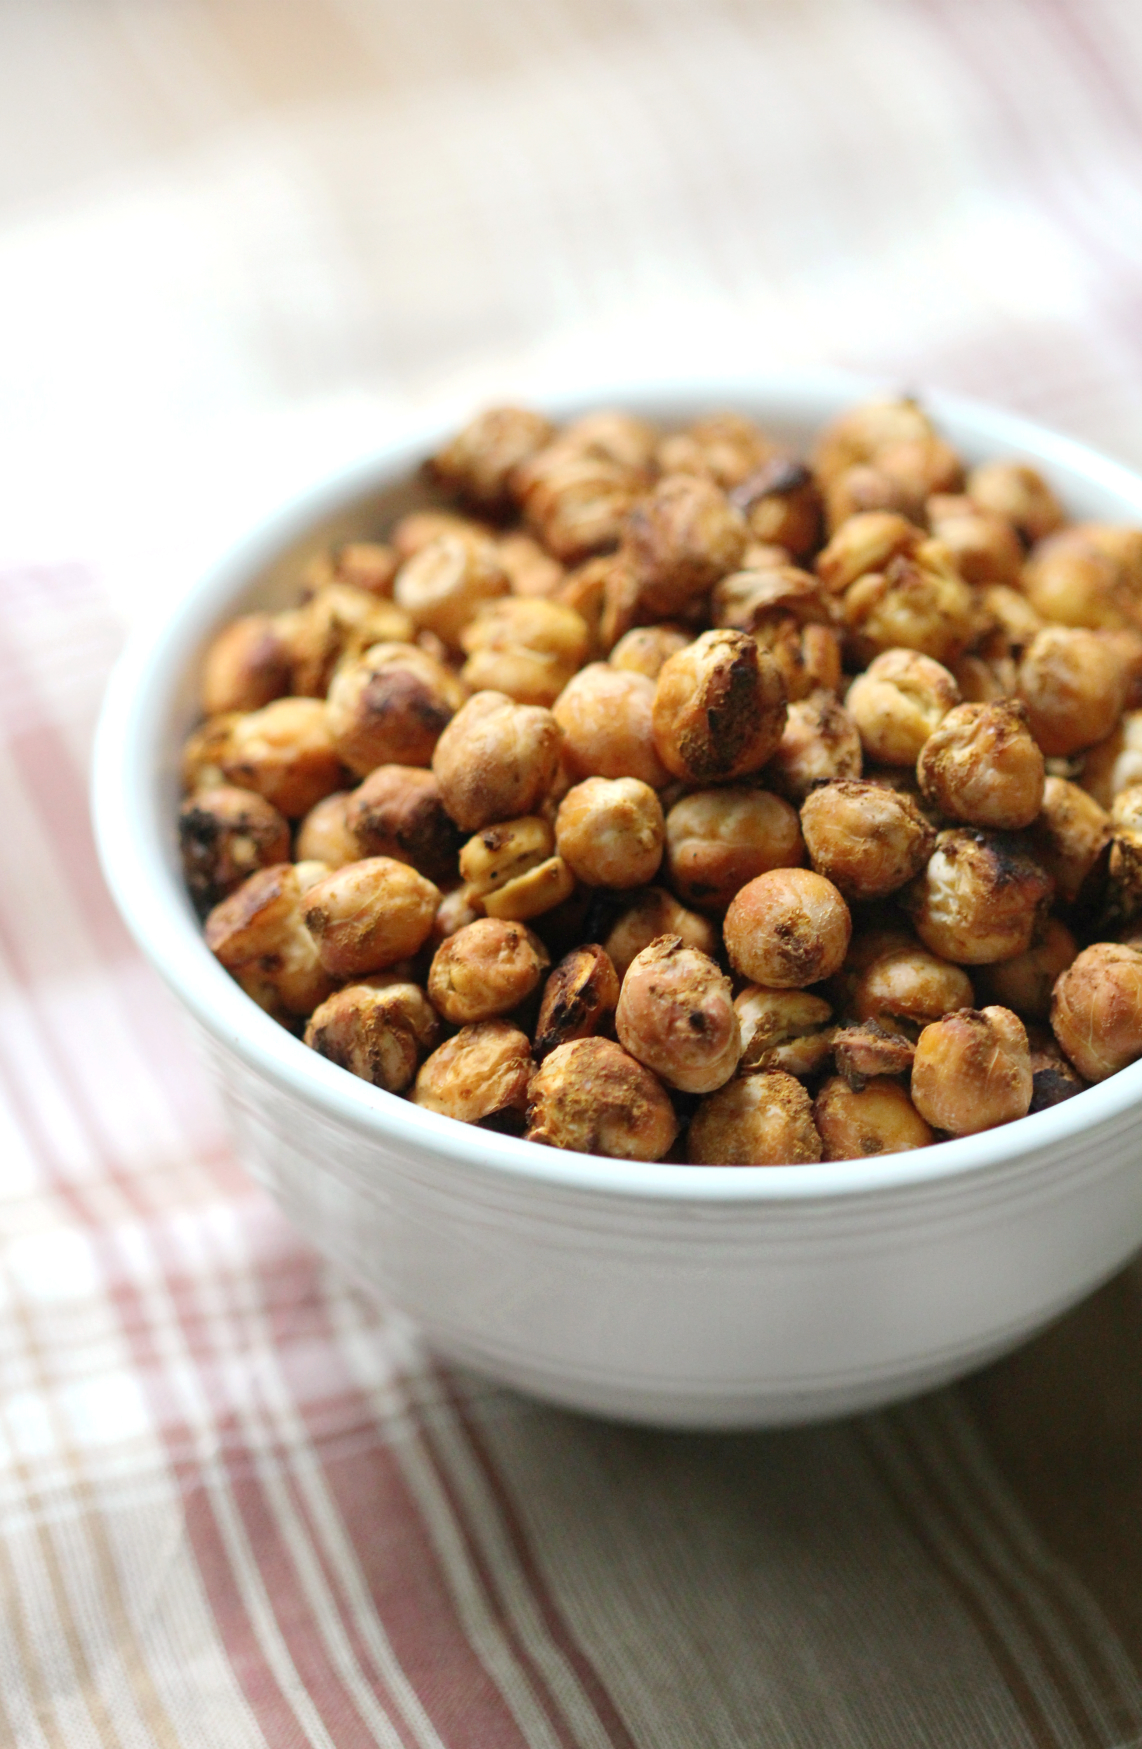 Pumpkin Spice Roasted Chickpeas | Strength and Sunshine @RebeccaGF666 A perfect healthy, crunchy, pumpkin snack! Satisfy your sweet snack craving with pumpkin spice roasted chickpeas. Gluten-free, vegan, and allergy-friendly, you won't be able to keep your hands off them!